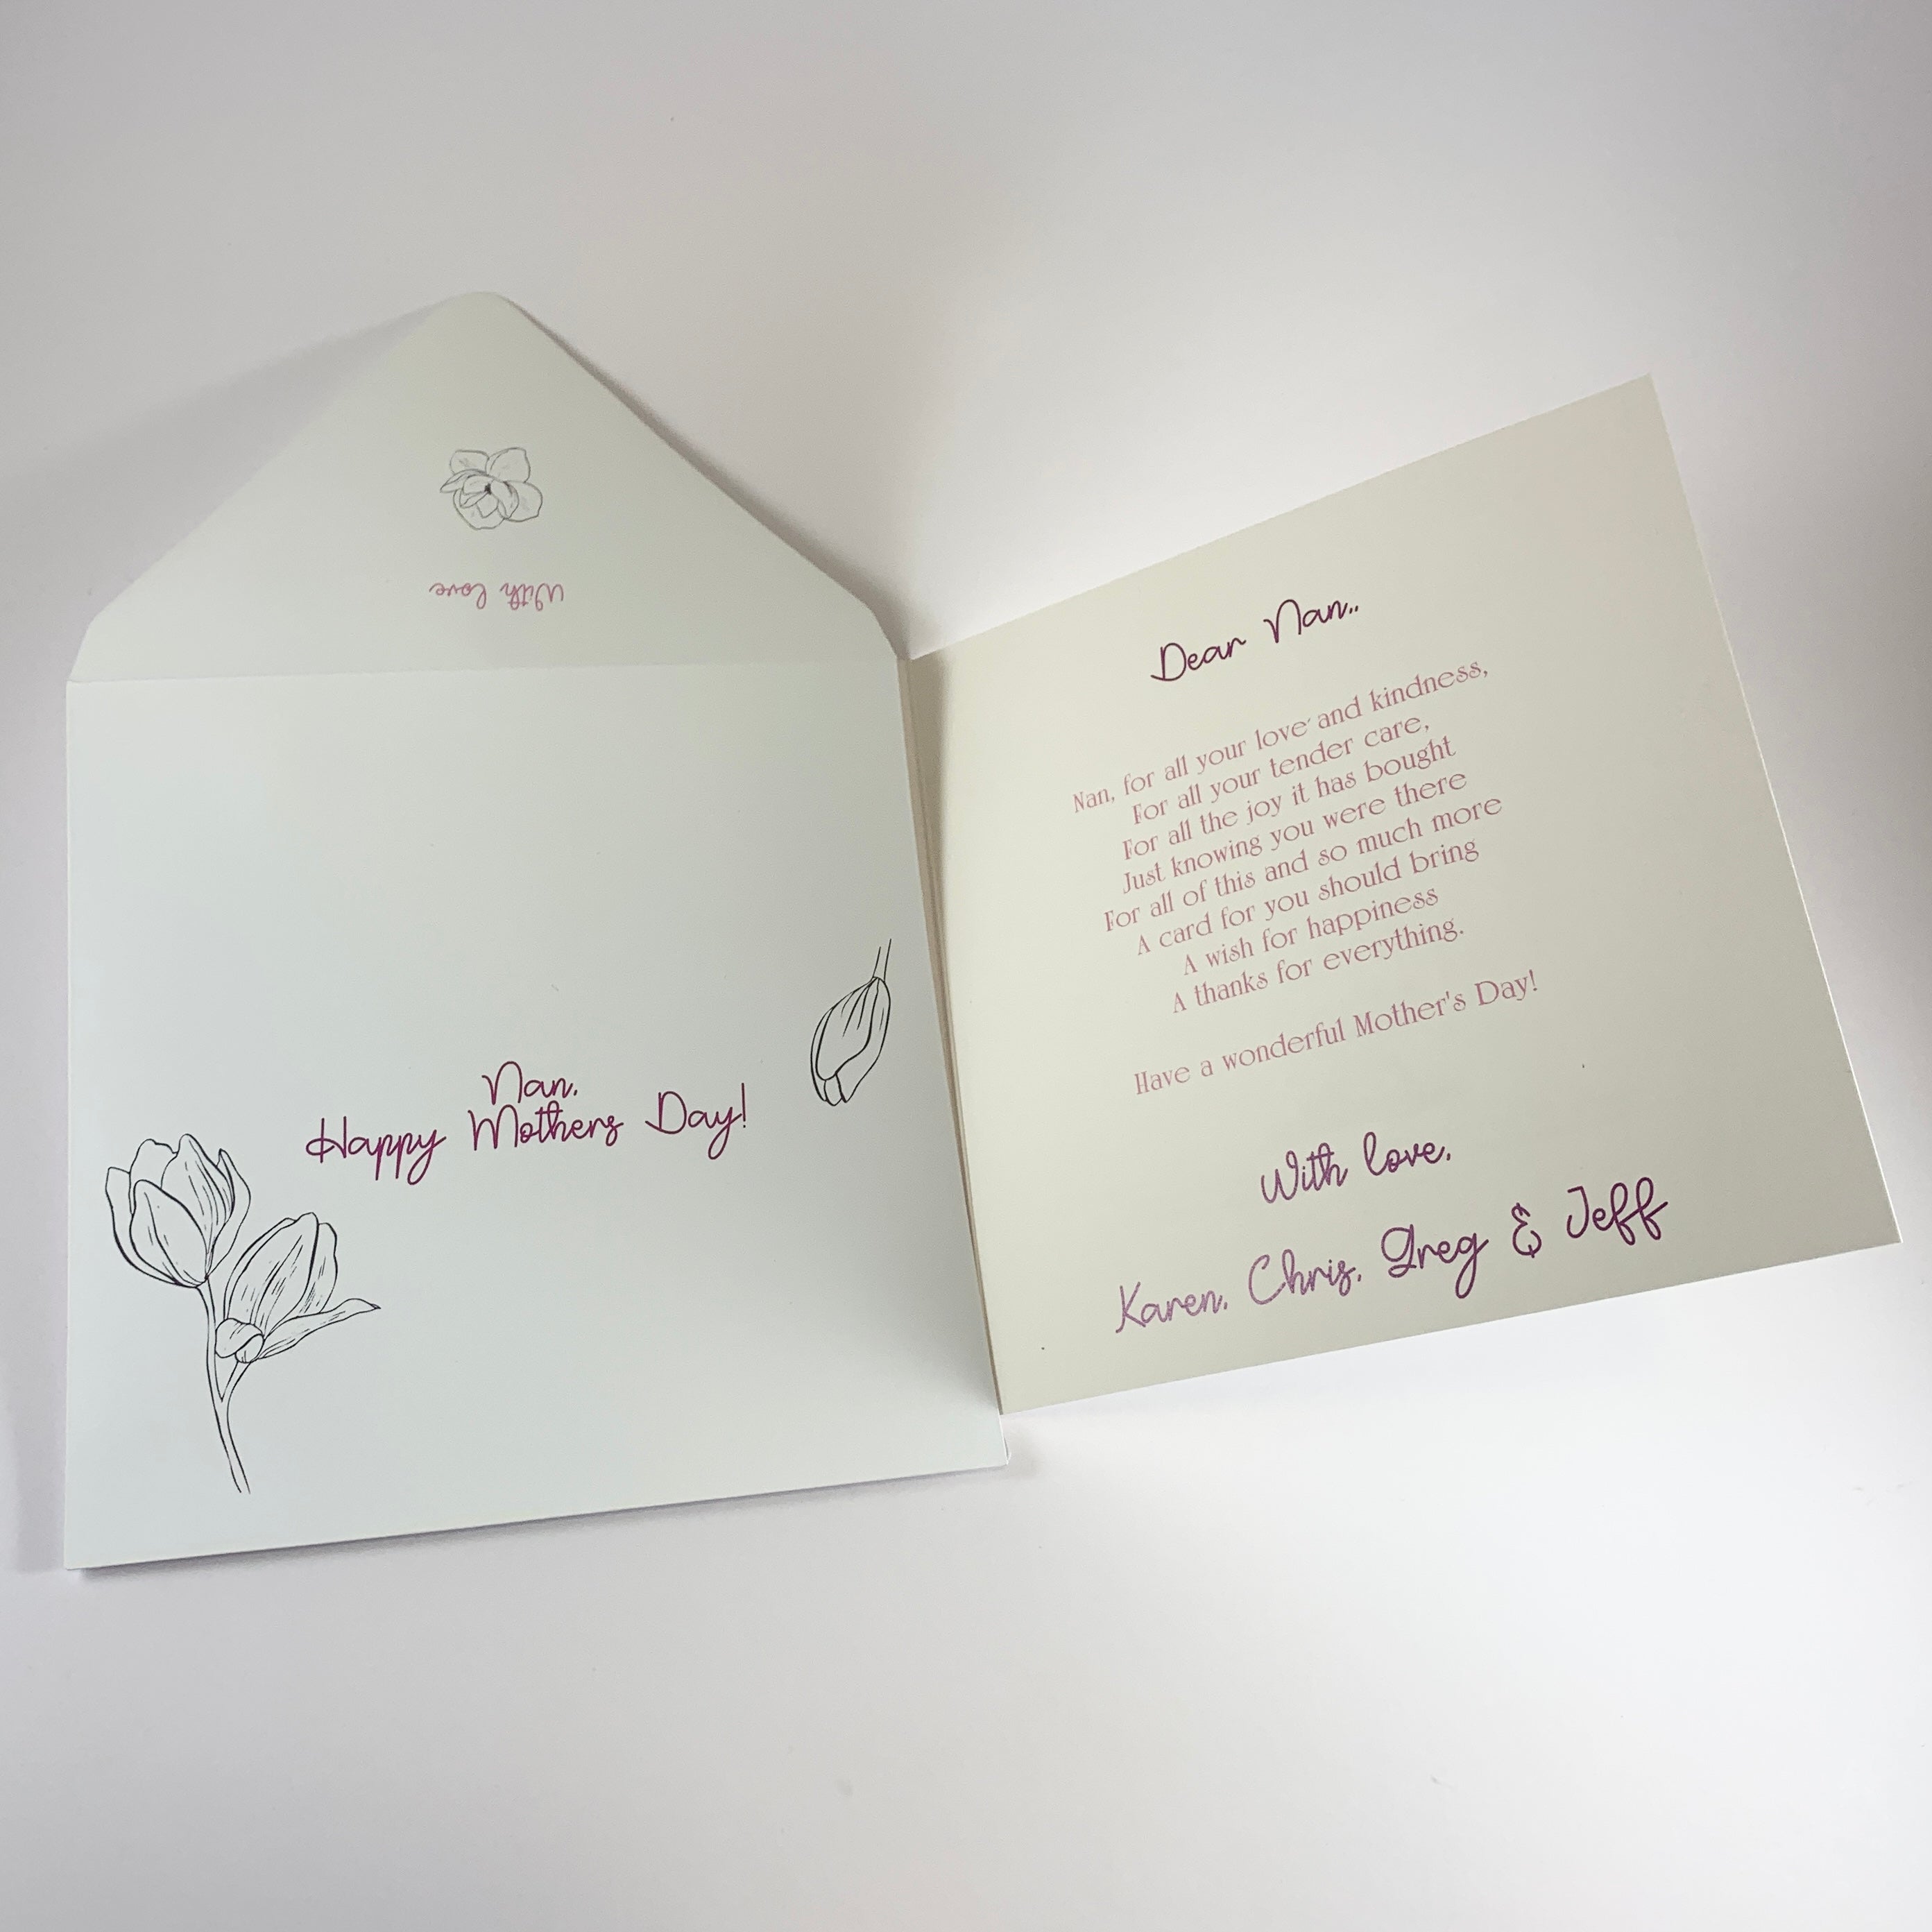 personalised envelope and card with mothers day verse and persnal name and message